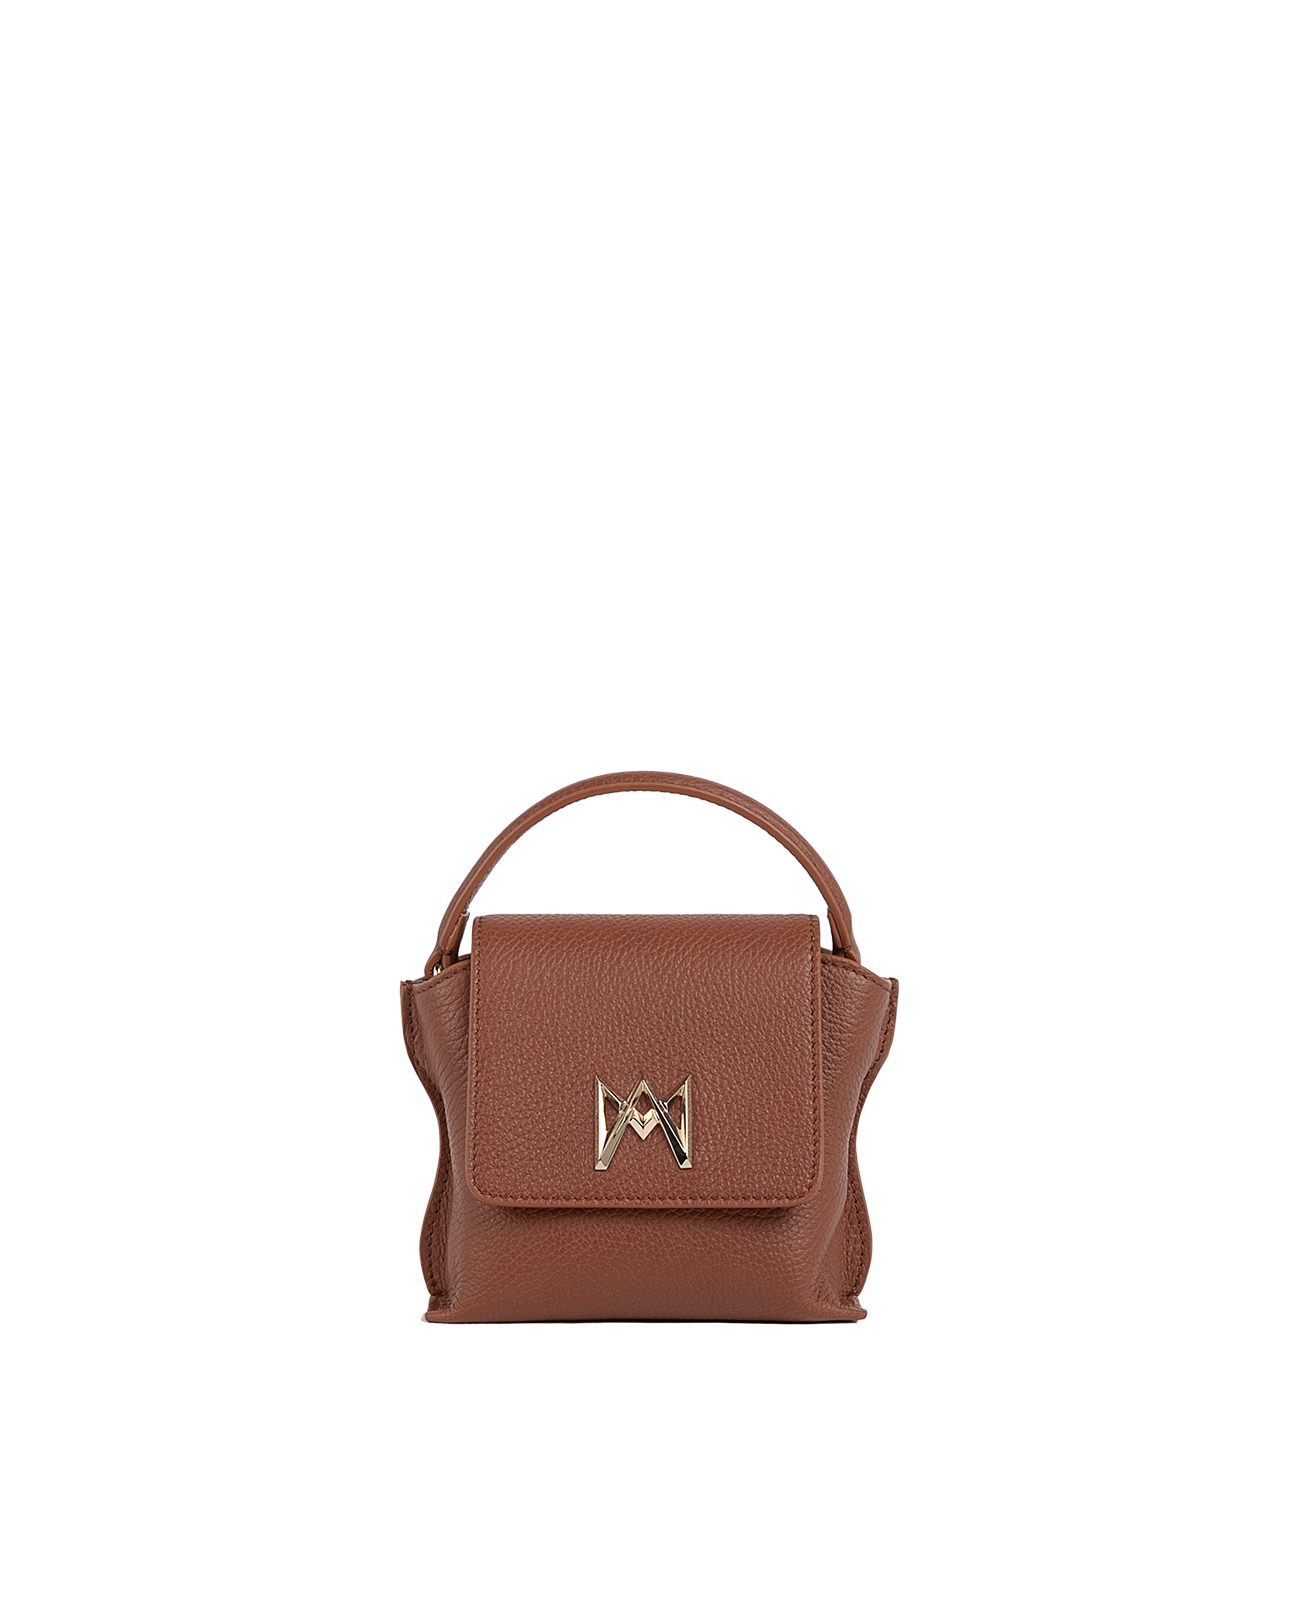 Cross-body bag in Italian full-grain leather, semi-aniline calf Italian leather with detachable shoulder strap.Three compartments, zip pocket in the back compartment. Magnetic flap closure with logo. Color: Dark Brown. Size: Mini.